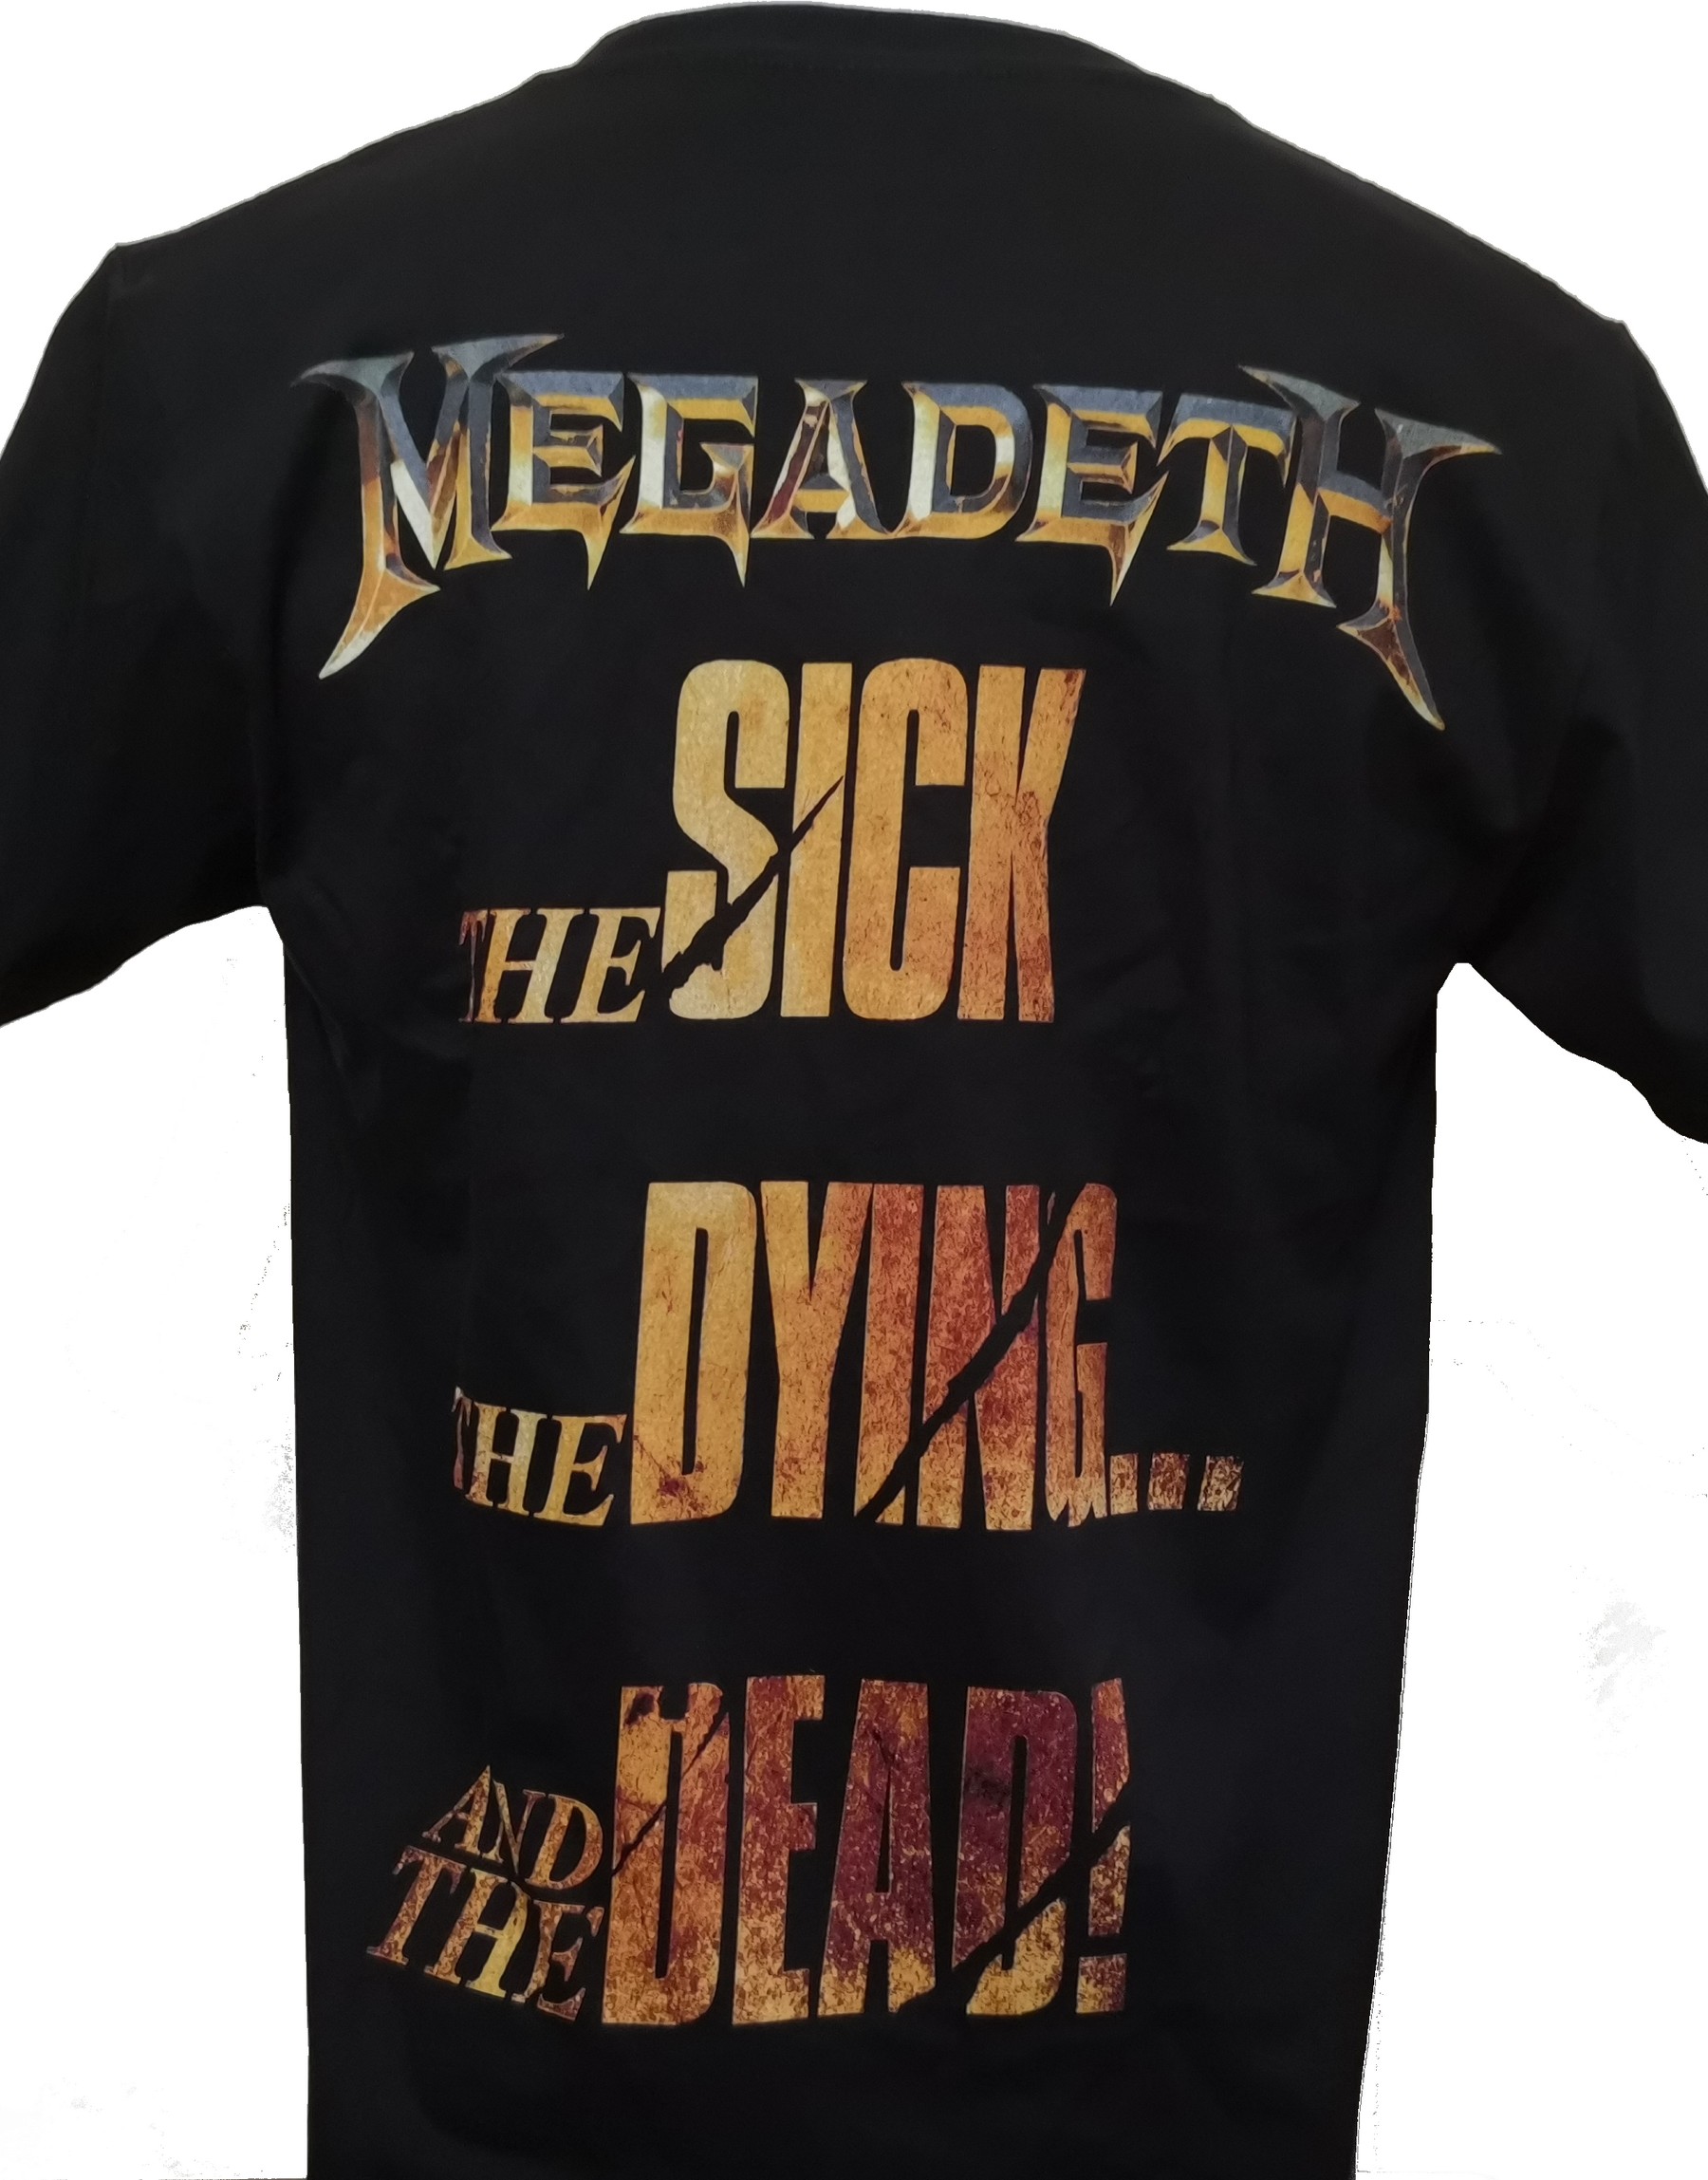 Megadeth t-shirt The Sick, the Dying and the Dead! size M